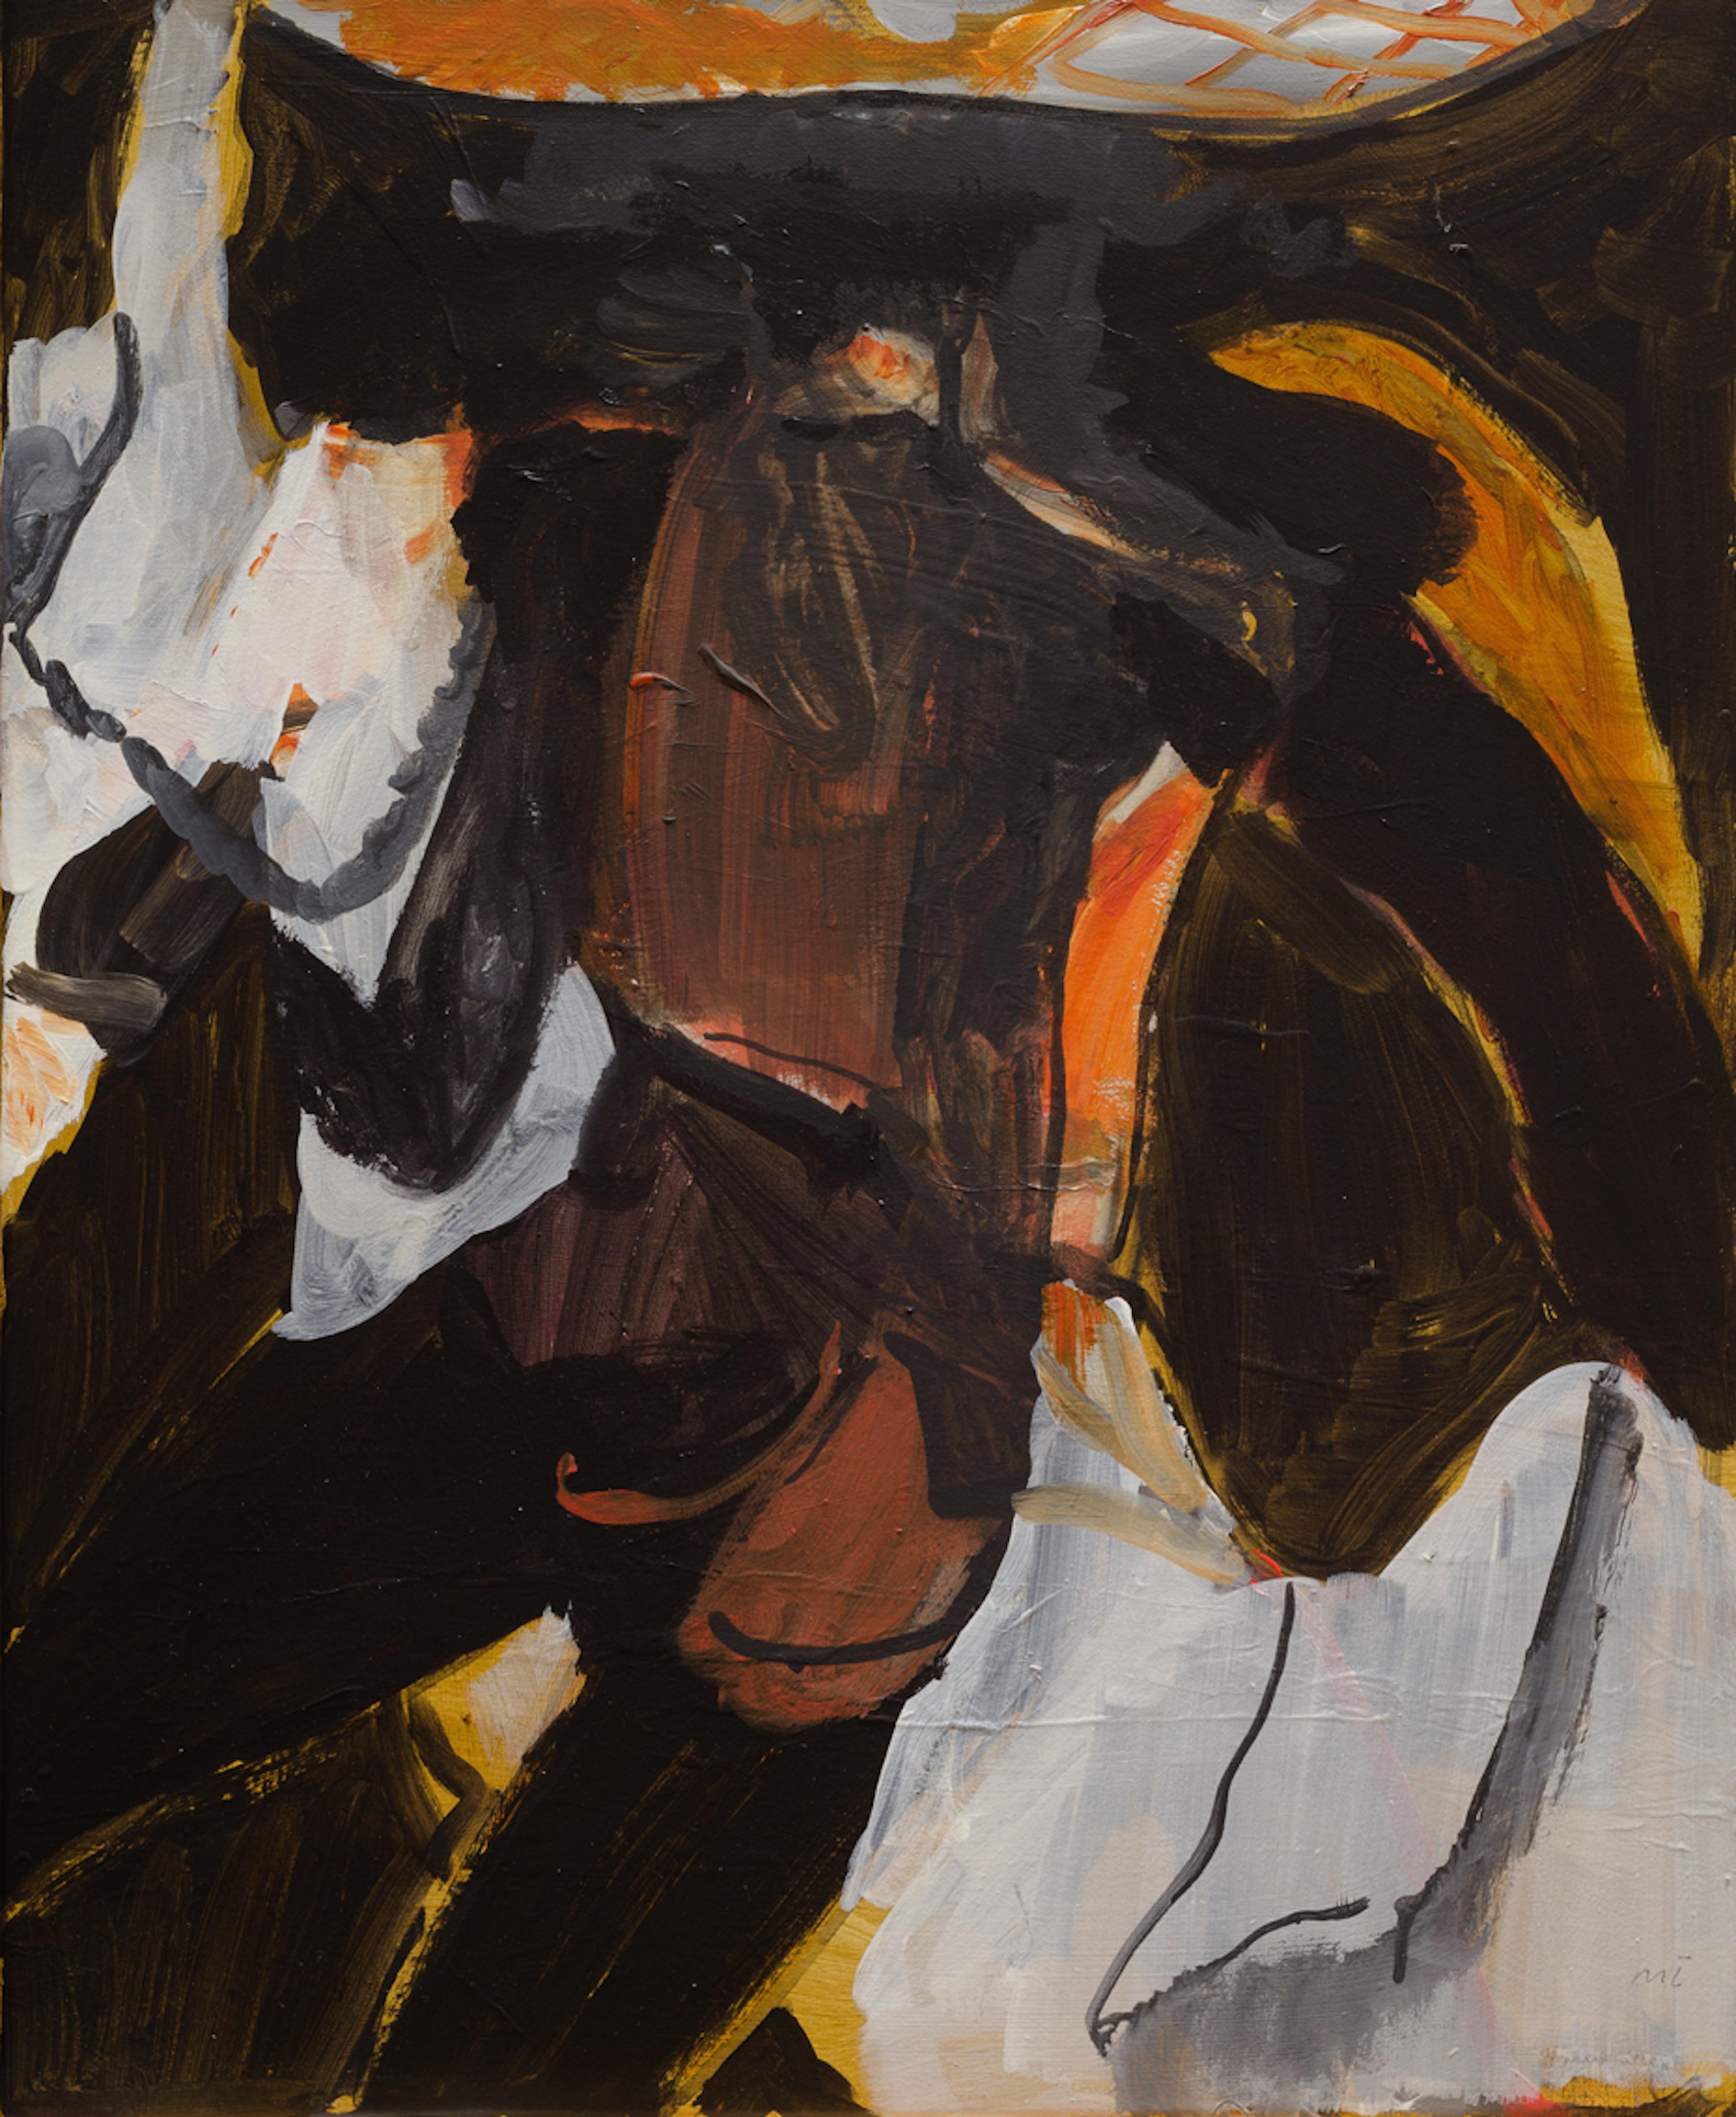  Michael Taylor  Figurative Painting - 'Wrangler', Contemporary figurative acrylic painting on canvas, 2019 55 x 45 cm